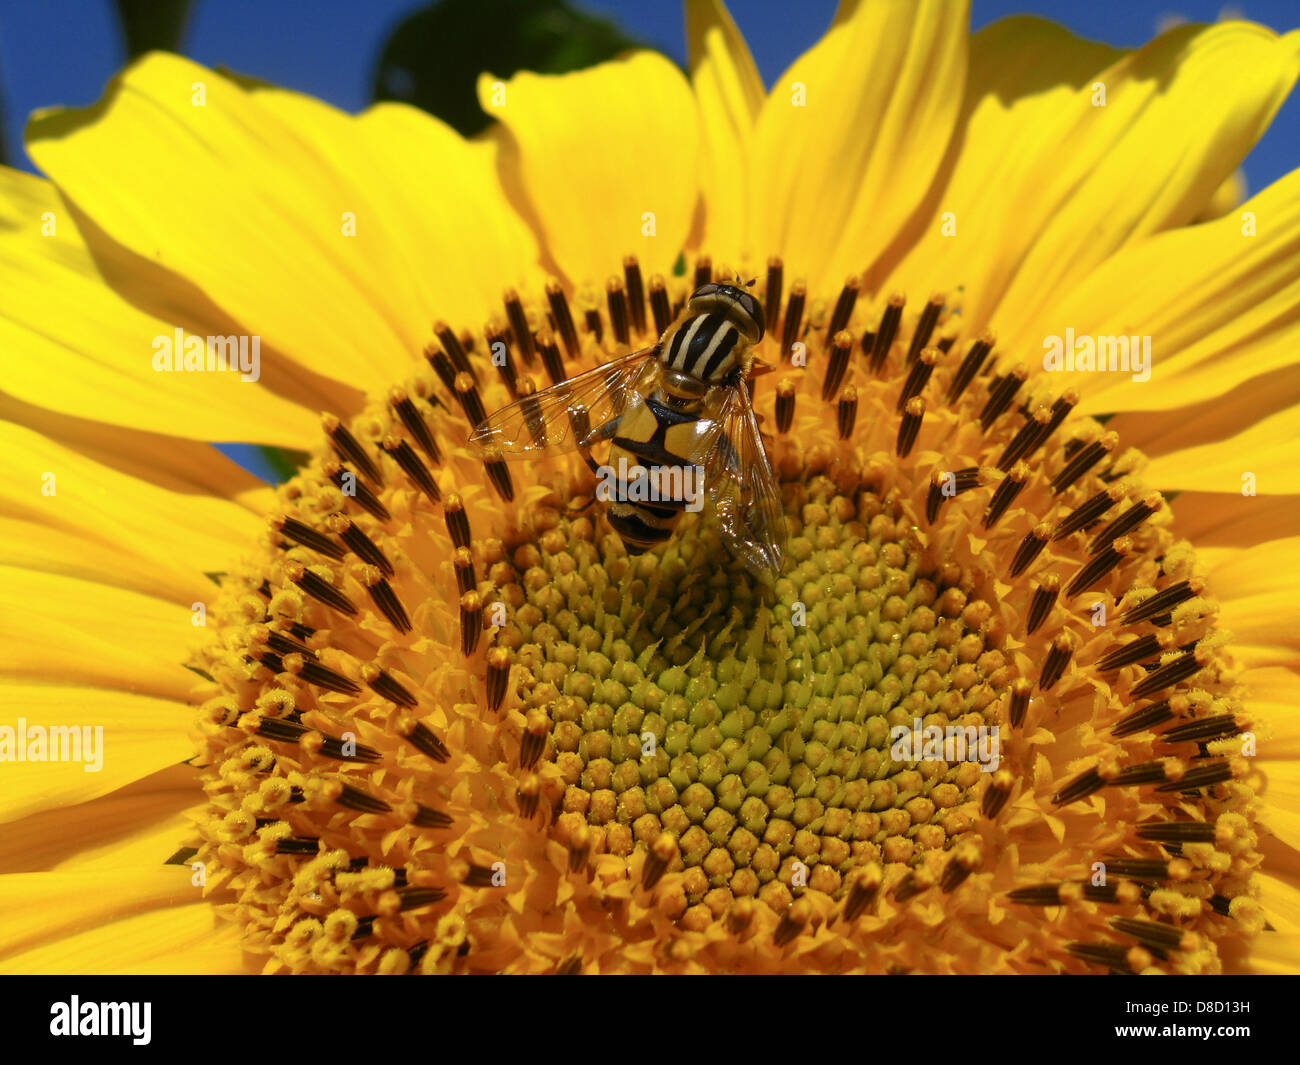 The yellow fly on a yellow sunflower on the sky background Stock Photo